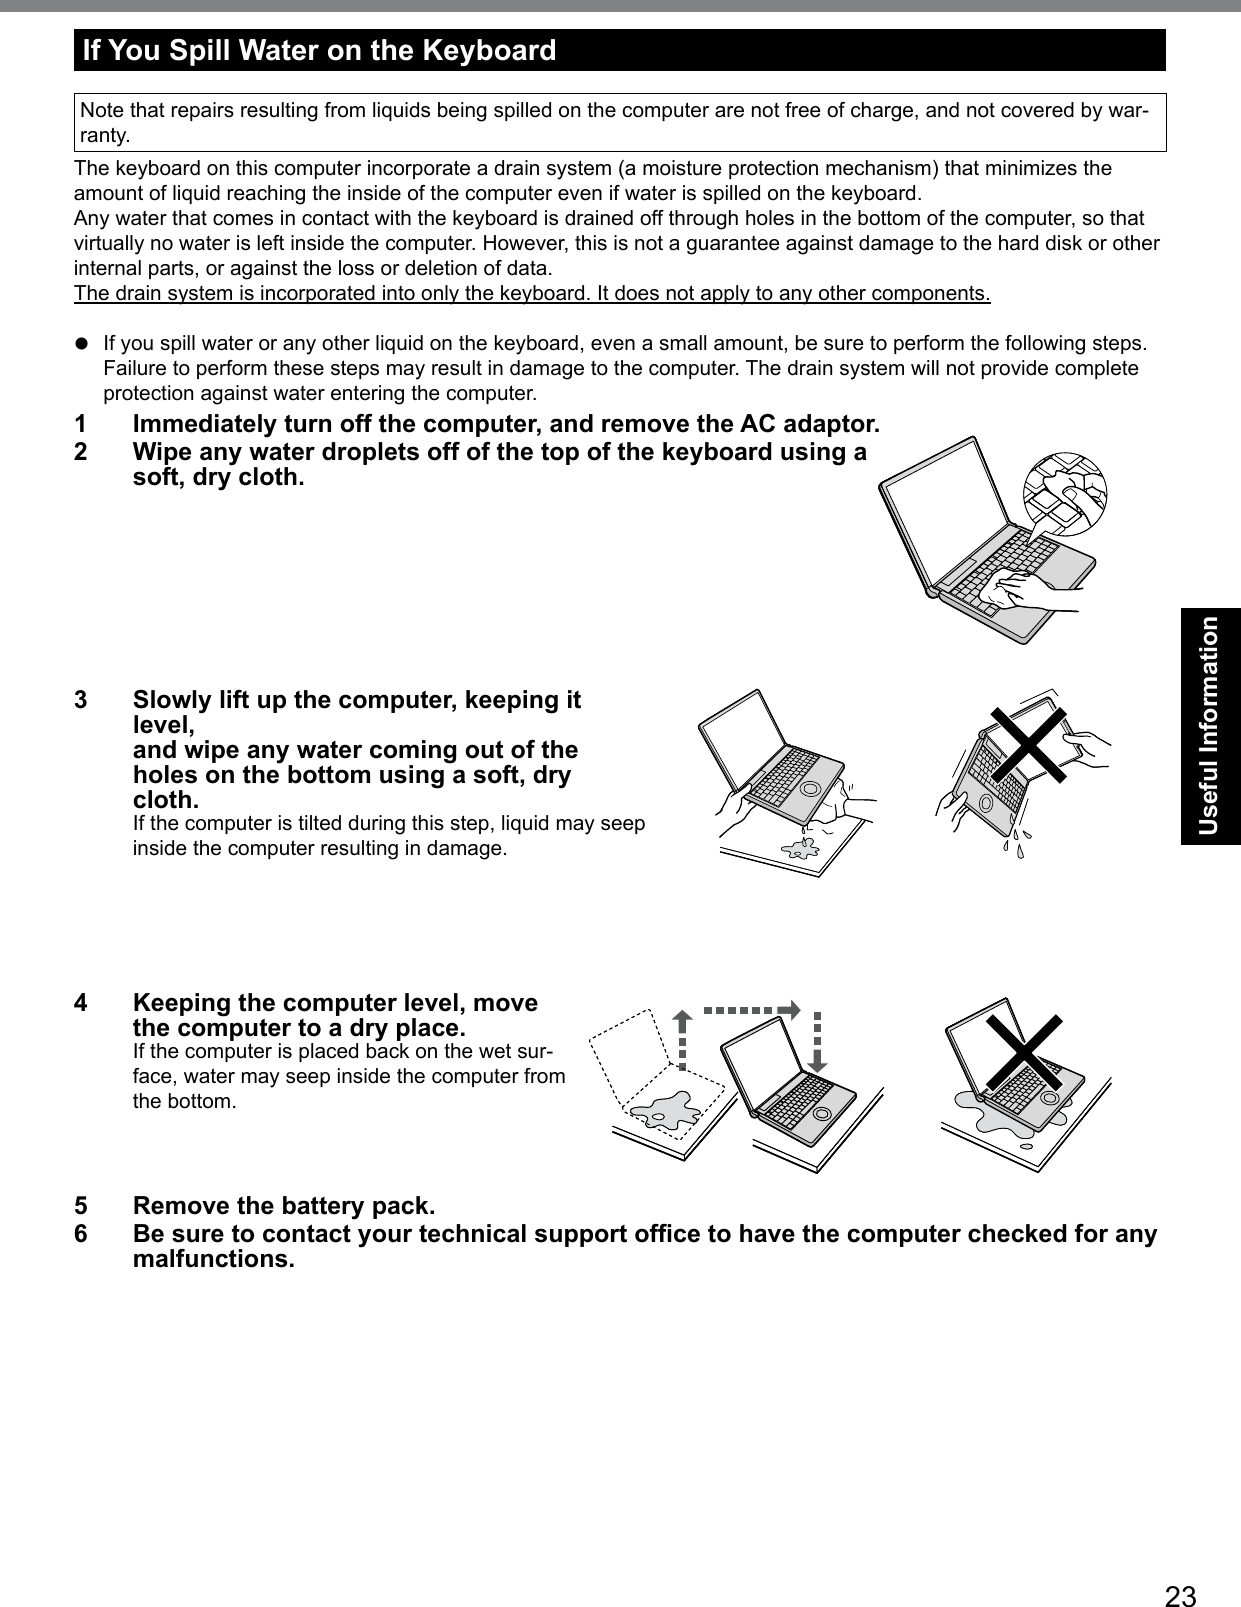 23Useful InformationIf You Spill Water on the KeyboardNote that repairs resulting from liquids being spilled on the computer are not free of charge, and not covered by war-ranty.The keyboard on this computer incorporate a drain system (a moisture protection mechanism) that minimizes the amount of liquid reaching the inside of the computer even if water is spilled on the keyboard.Any water that comes in contact with the keyboard is drained off through holes in the bottom of the computer, so that virtually no water is left inside the computer. However, this is not a guarantee against damage to the hard disk or other internal parts, or against the loss or deletion of data.The drain system is incorporated into only the keyboard. It does not apply to any other components.l  If you spill water or any other liquid on the keyboard, even a small amount, be sure to perform the following steps.Failure to perform these steps may result in damage to the computer. The drain system will not provide complete protection against water entering the computer.1  Immediately turn off the computer, and remove the AC adaptor. 2  Wipe any water droplets off of the top of the keyboard using a soft, dry cloth.3  Slowly lift up the computer, keeping it level,  and wipe any water coming out of the holes on the bottom using a soft, dry cloth.If the computer is tilted during this step, liquid may seep inside the computer resulting in damage.4  Keeping the computer level, move the computer to a dry place.If the computer is placed back on the wet sur-face, water may seep inside the computer from the bottom.5  Remove the battery pack.6  Be sure to contact your technical support ofce to have the computer checked for any malfunctions.